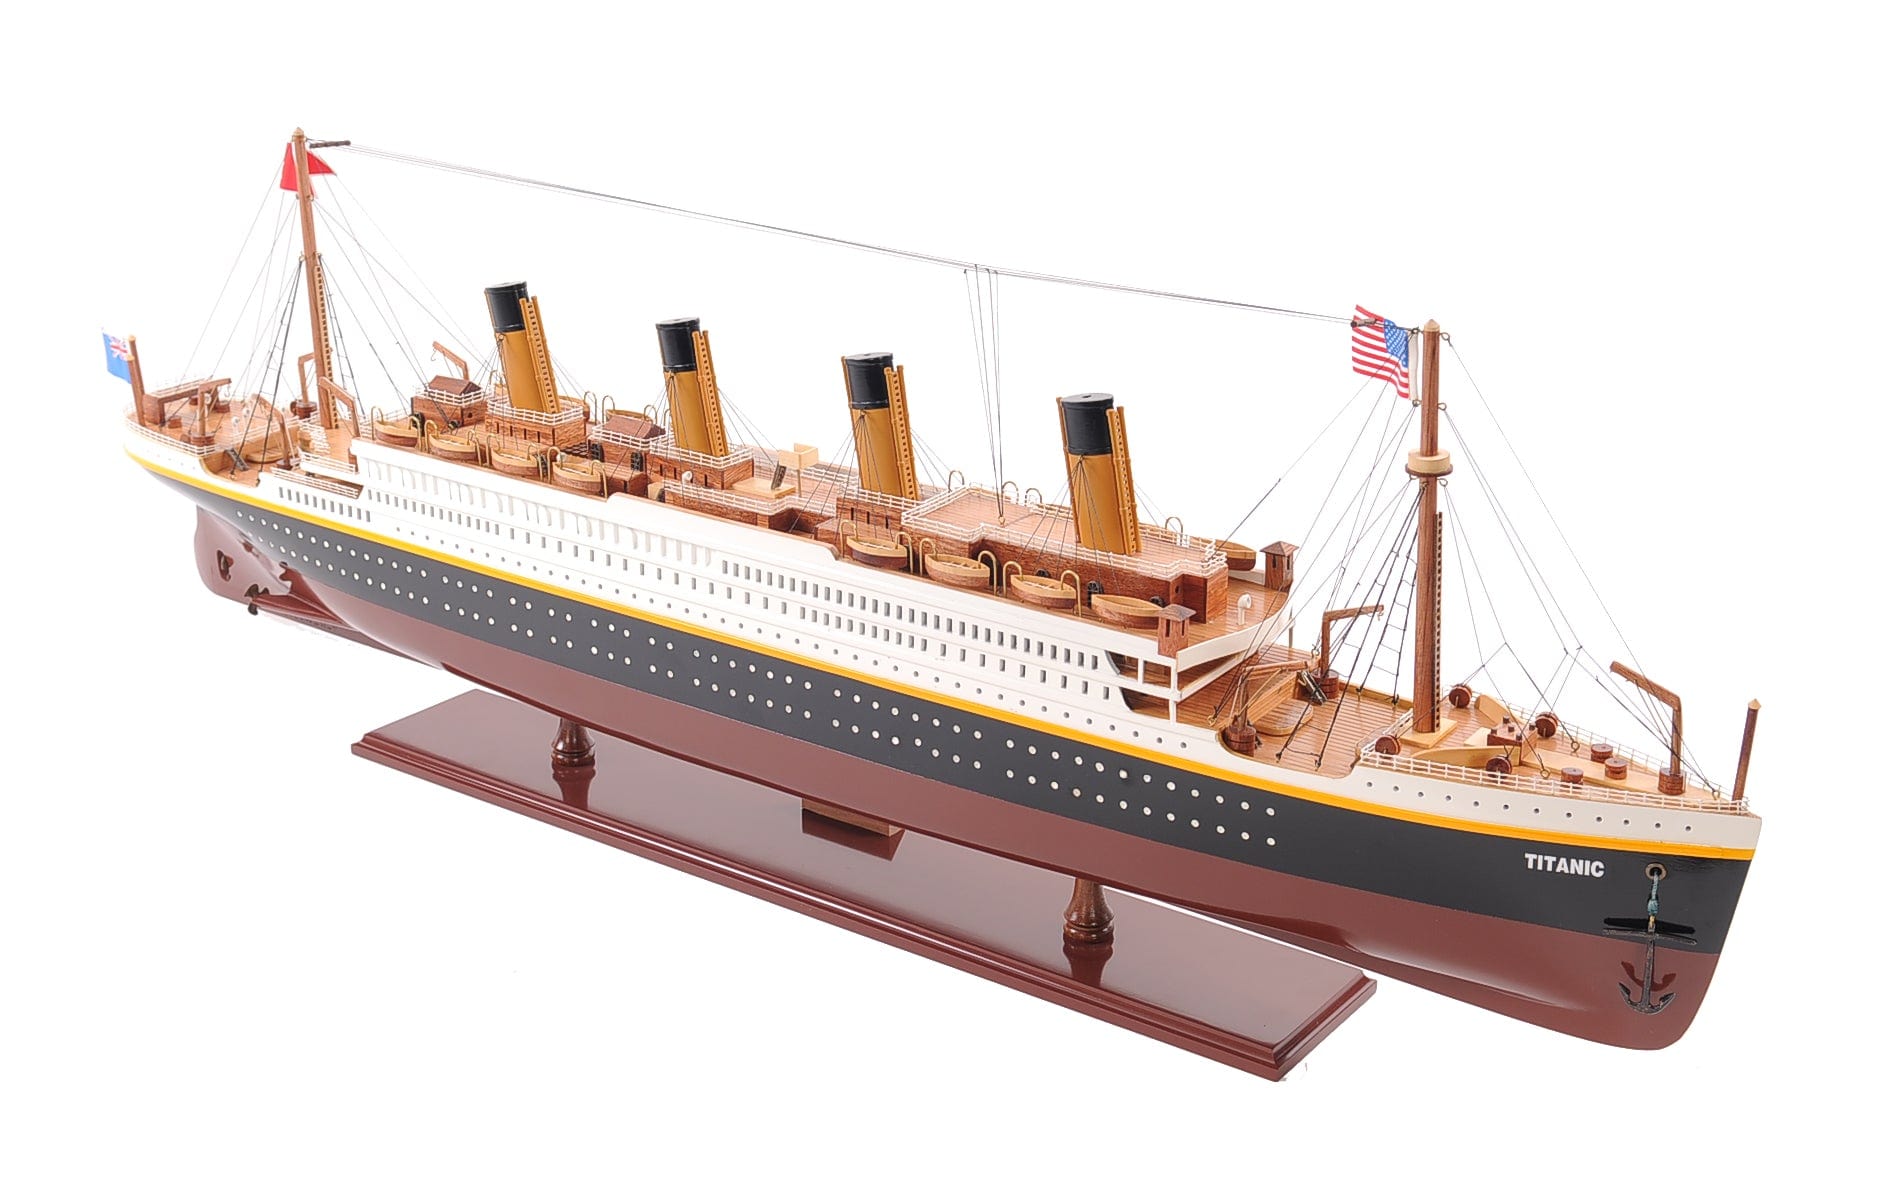 ALDO Hobbies & Creative Arts> Collectibles> Scale Model L: 25 W: 3.5 H: 10 Inches / NEW / Wood RMS Titanic Painted Small  Passenger Ship Ocean Liner Wood Model Assembled